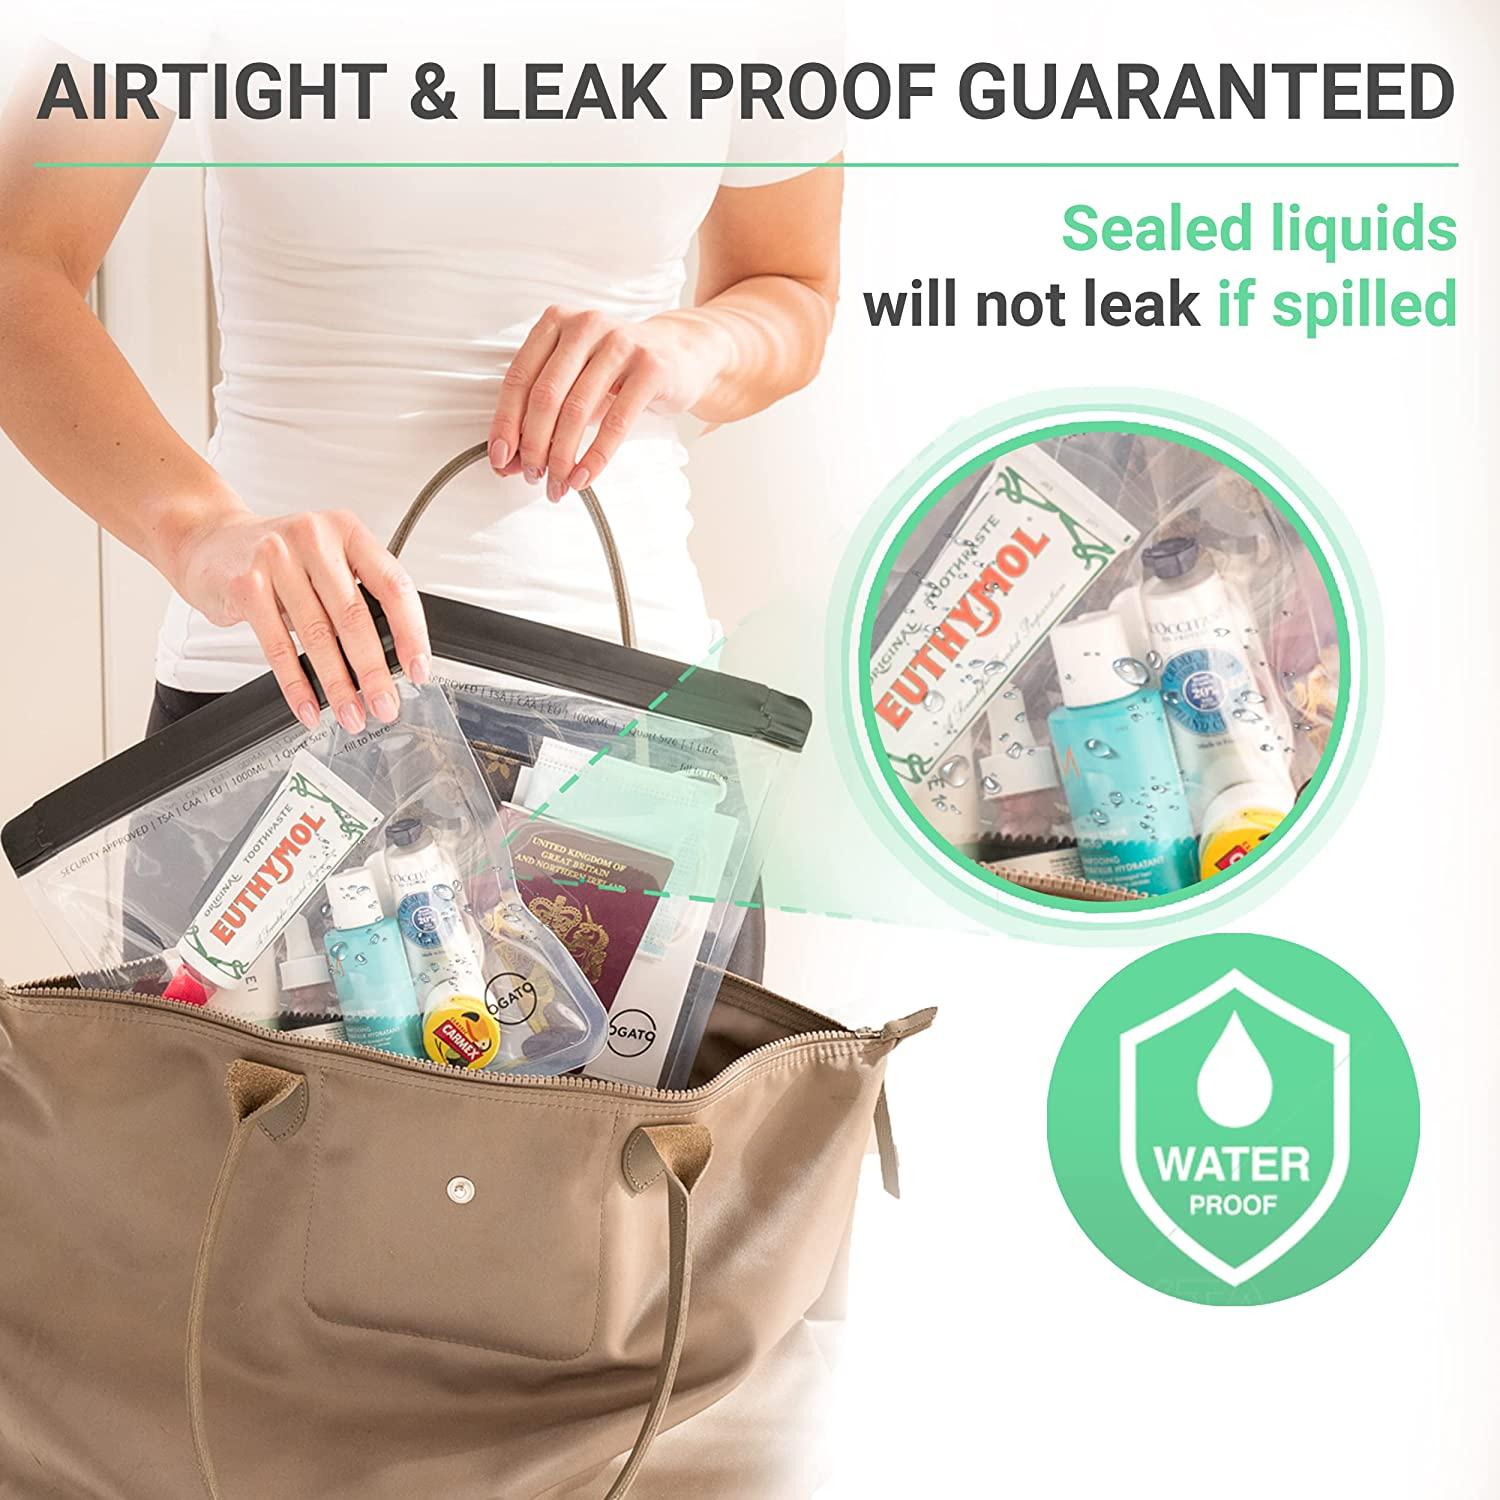 Clear Travel Toiletry Bag, Airport Security Approved Liquids Bags